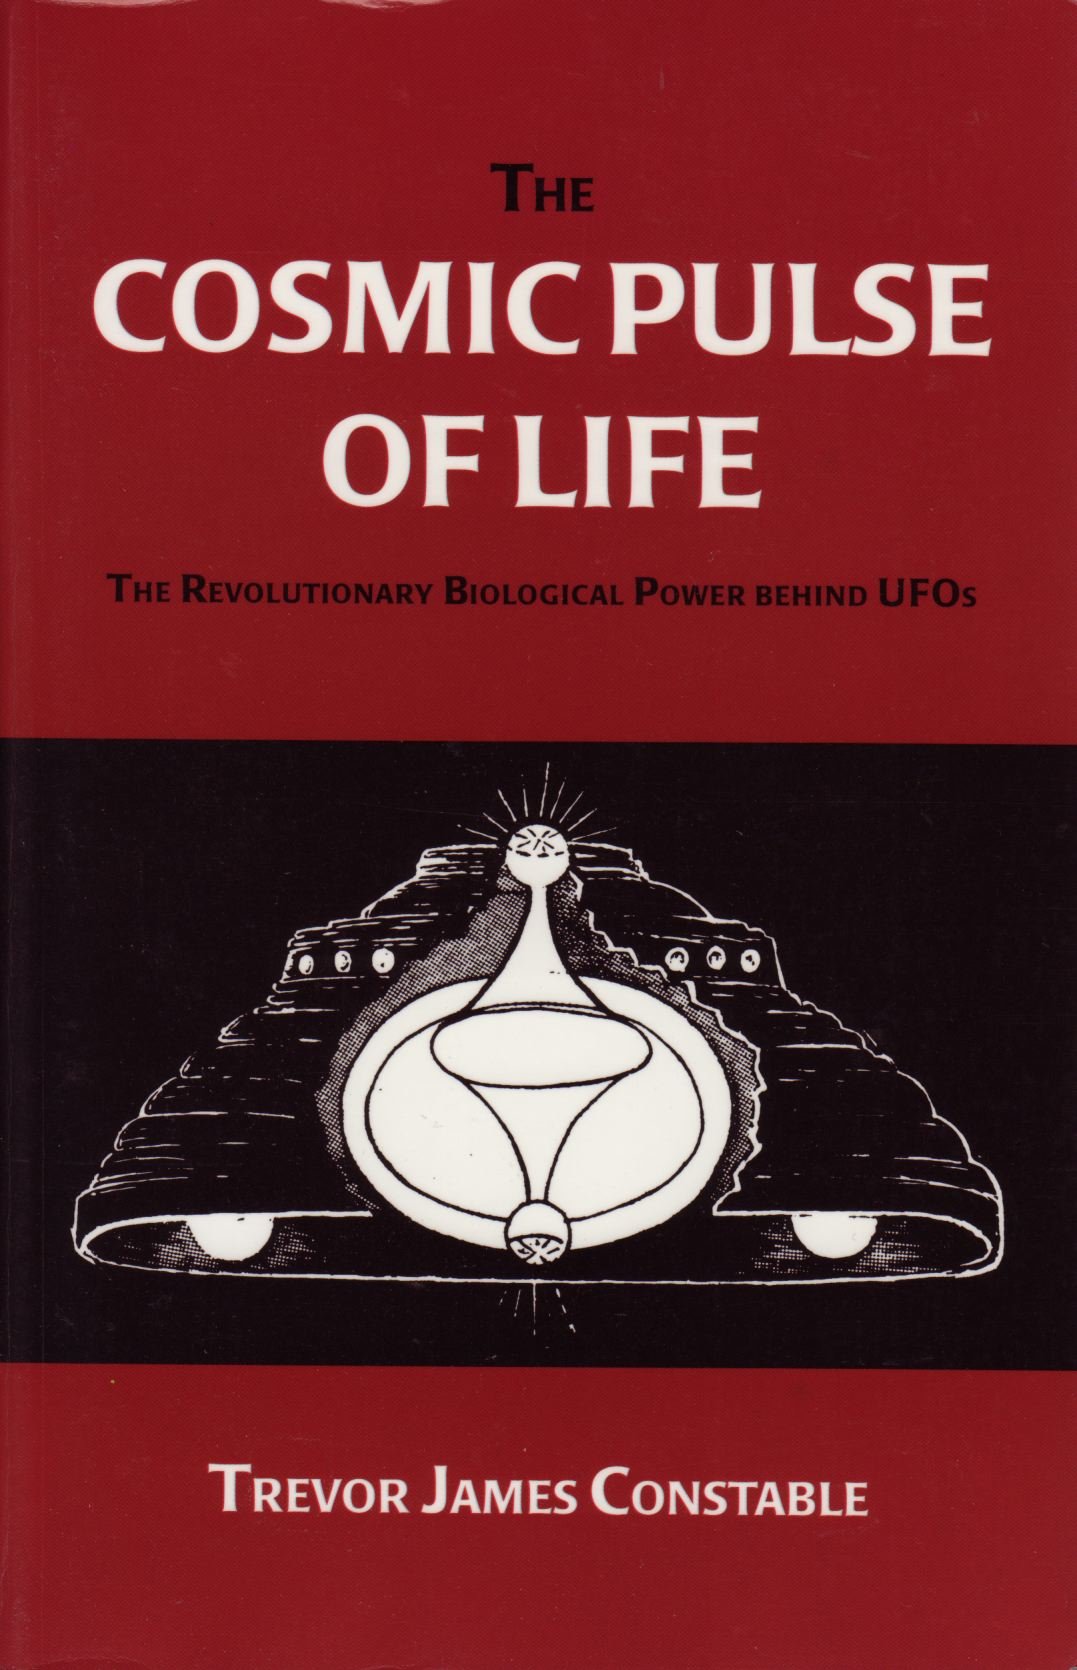 The Cosmic Pulse of Life: The Revolutionary Biological Power behind UFOs